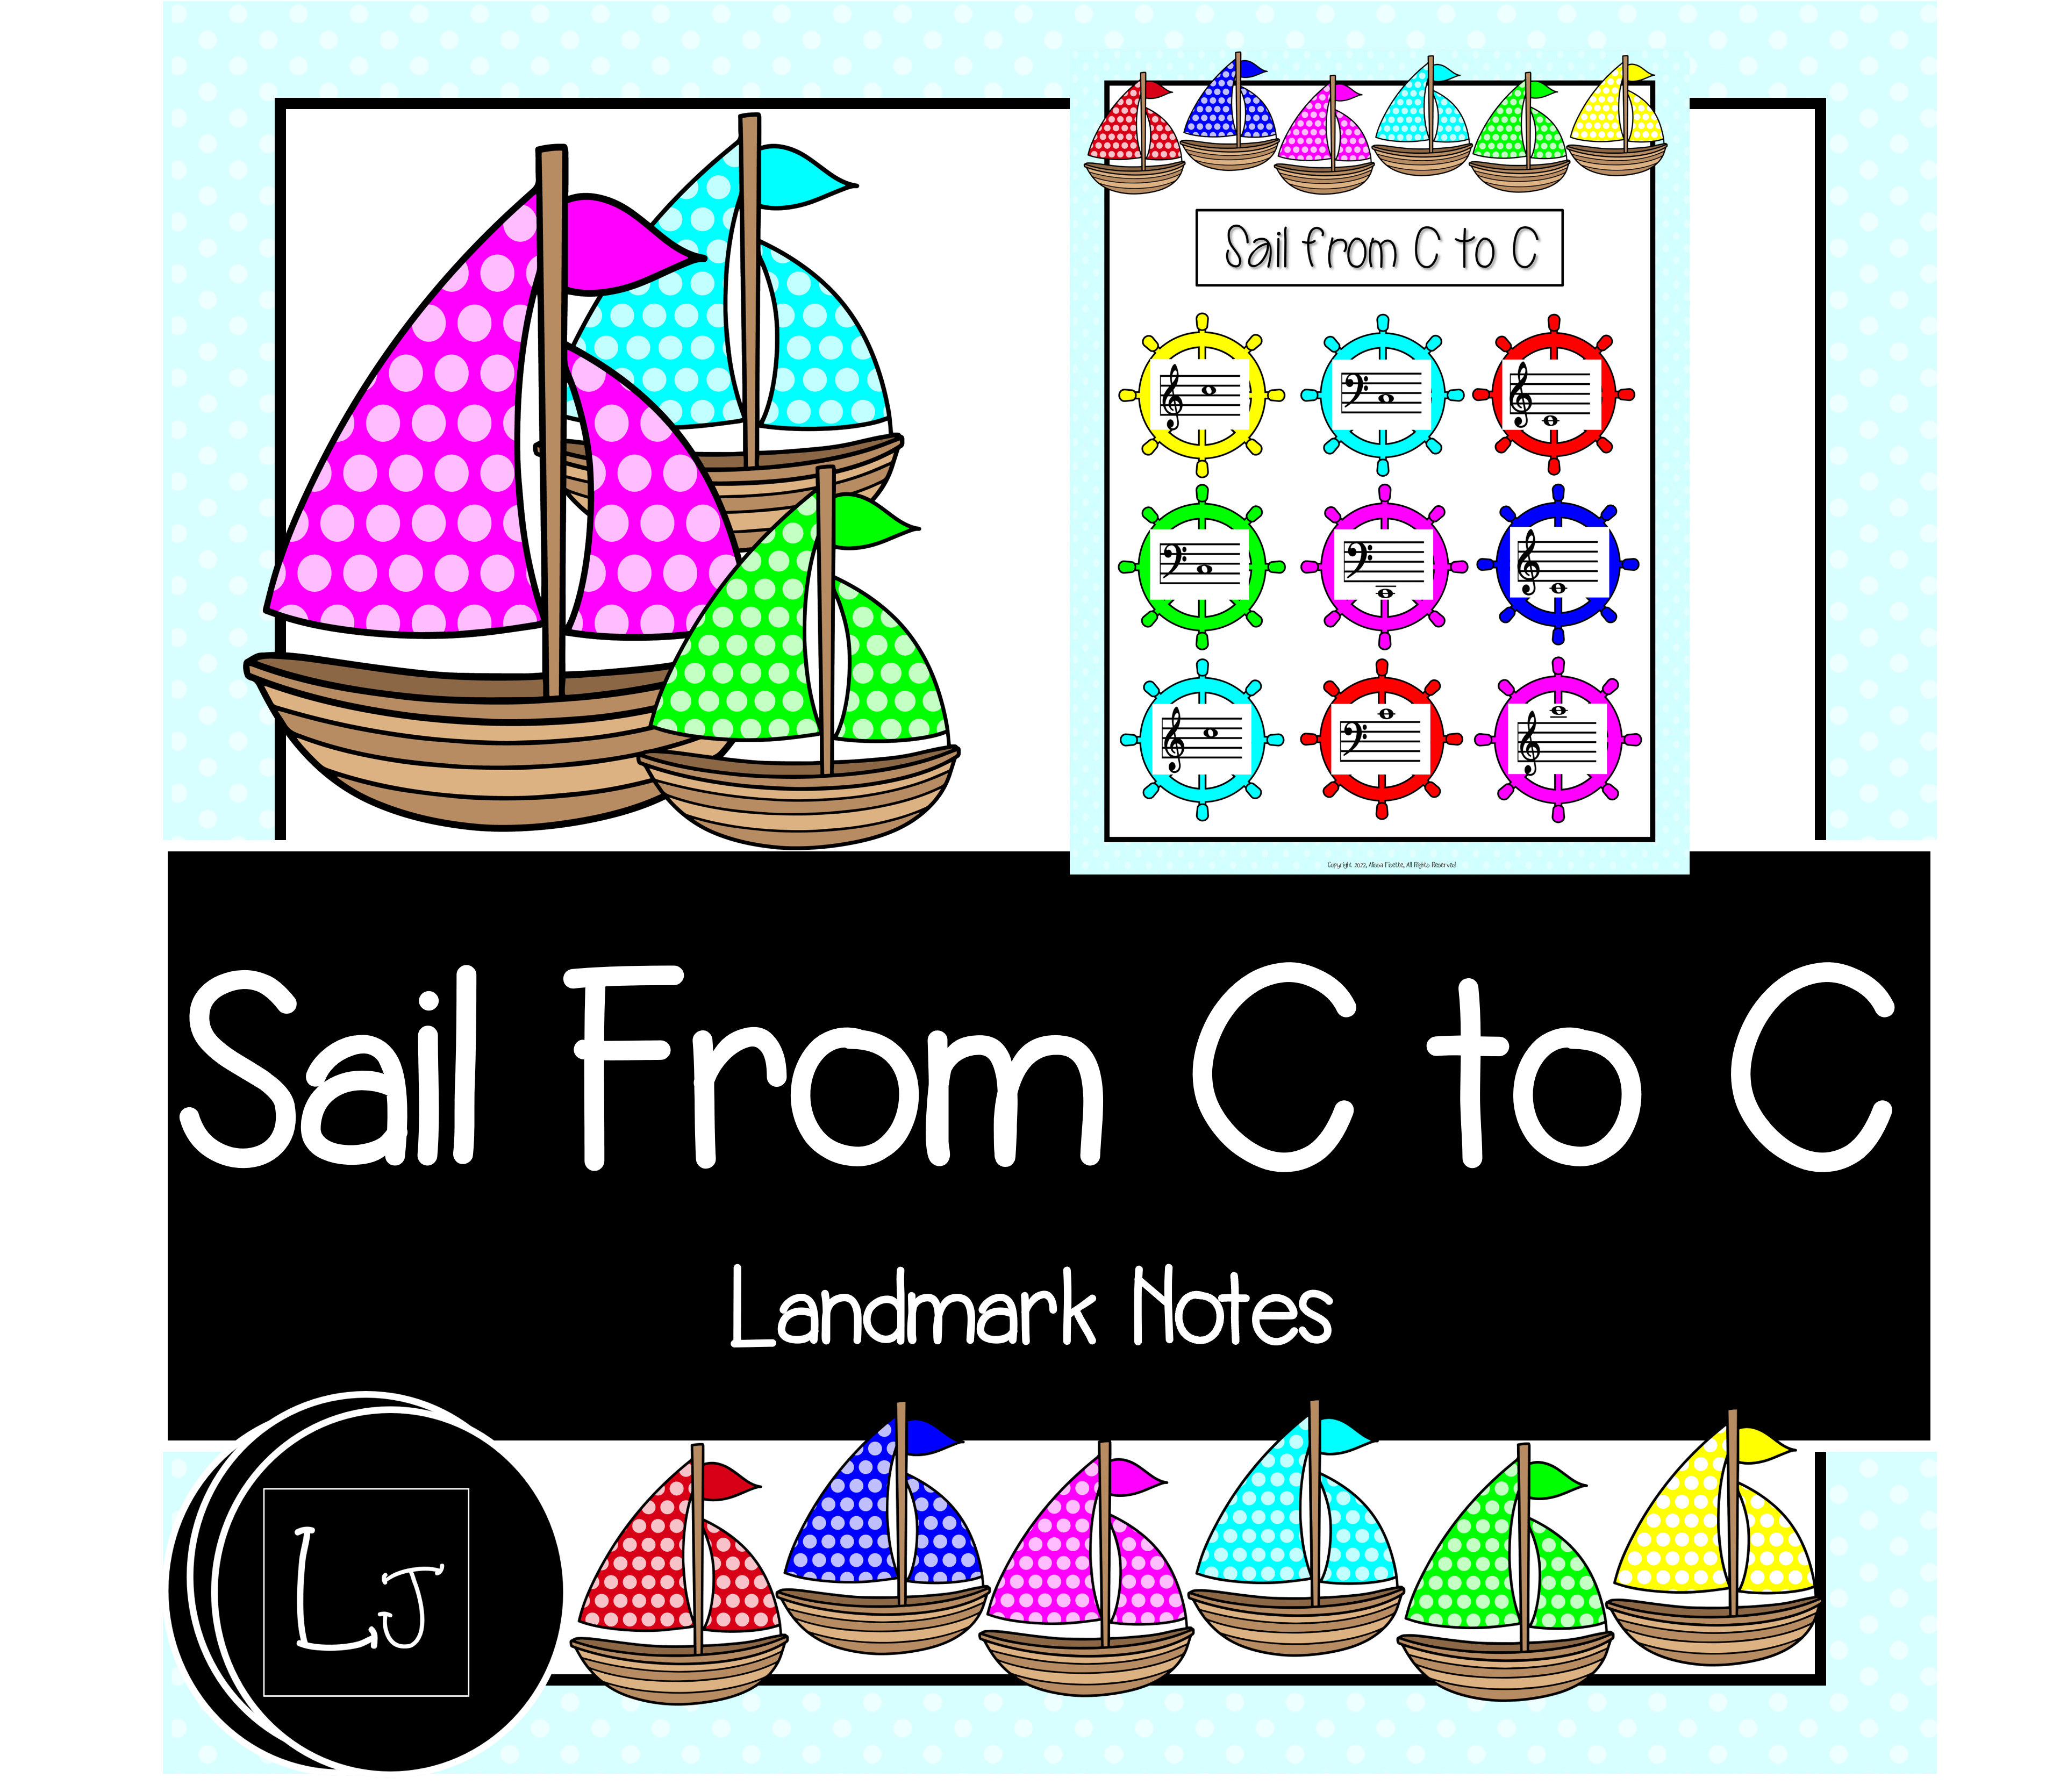 Landmark notes game C Sail from C to C